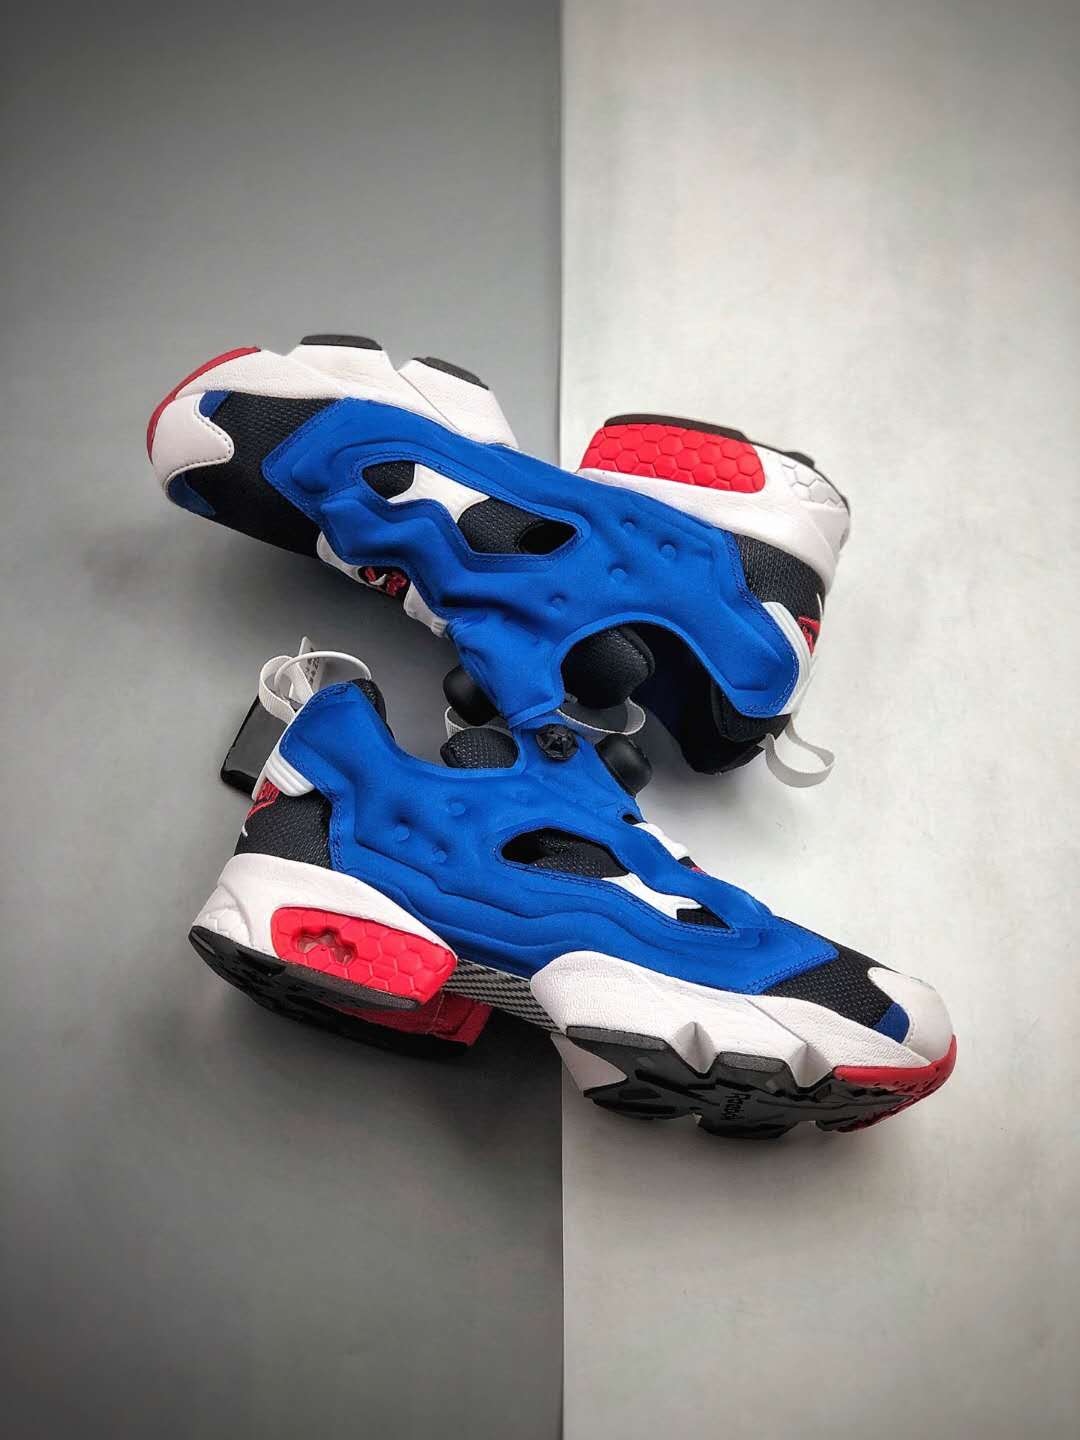 Reebok InstaPump Fury OG 'Tricolor' M40934 - Iconic Sneaker with Tri-Tone Design